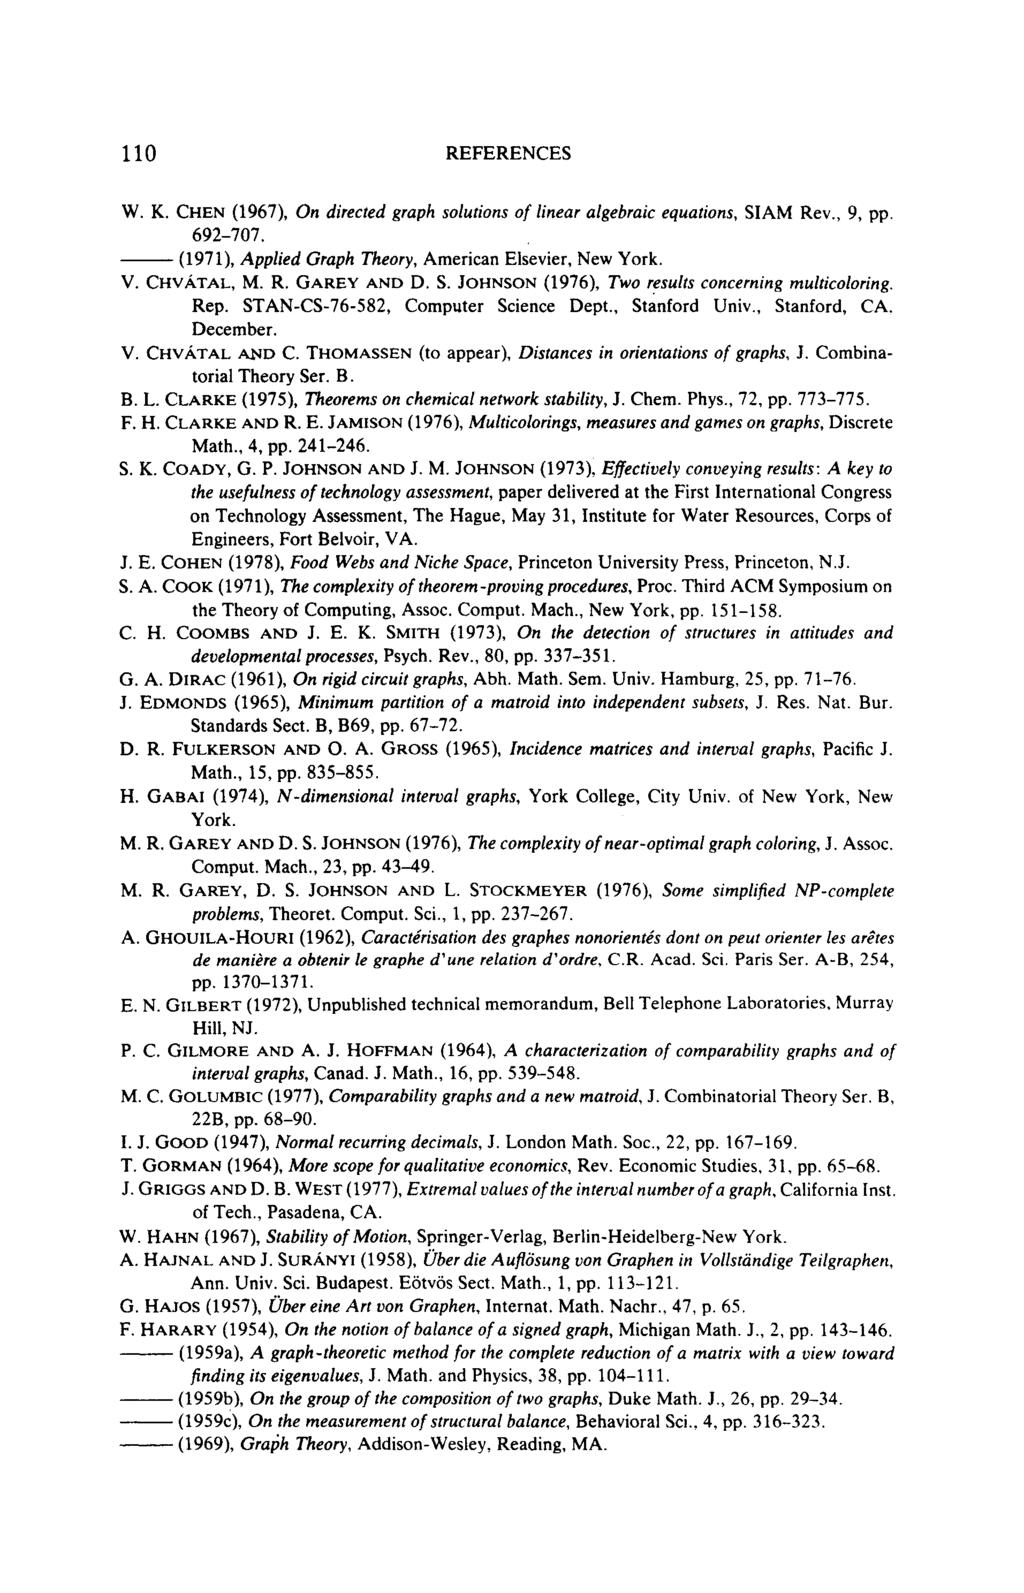 110 REFERENCES W. K. CHEN (1967), On directed graph solutions of linear algebraic equations, SIAM Rev., 9, pp. 692-707. (1971), Applied Graph Theory, American Elsevier, New York. V. CHVÁTAL, M. R. GAREY AND D.